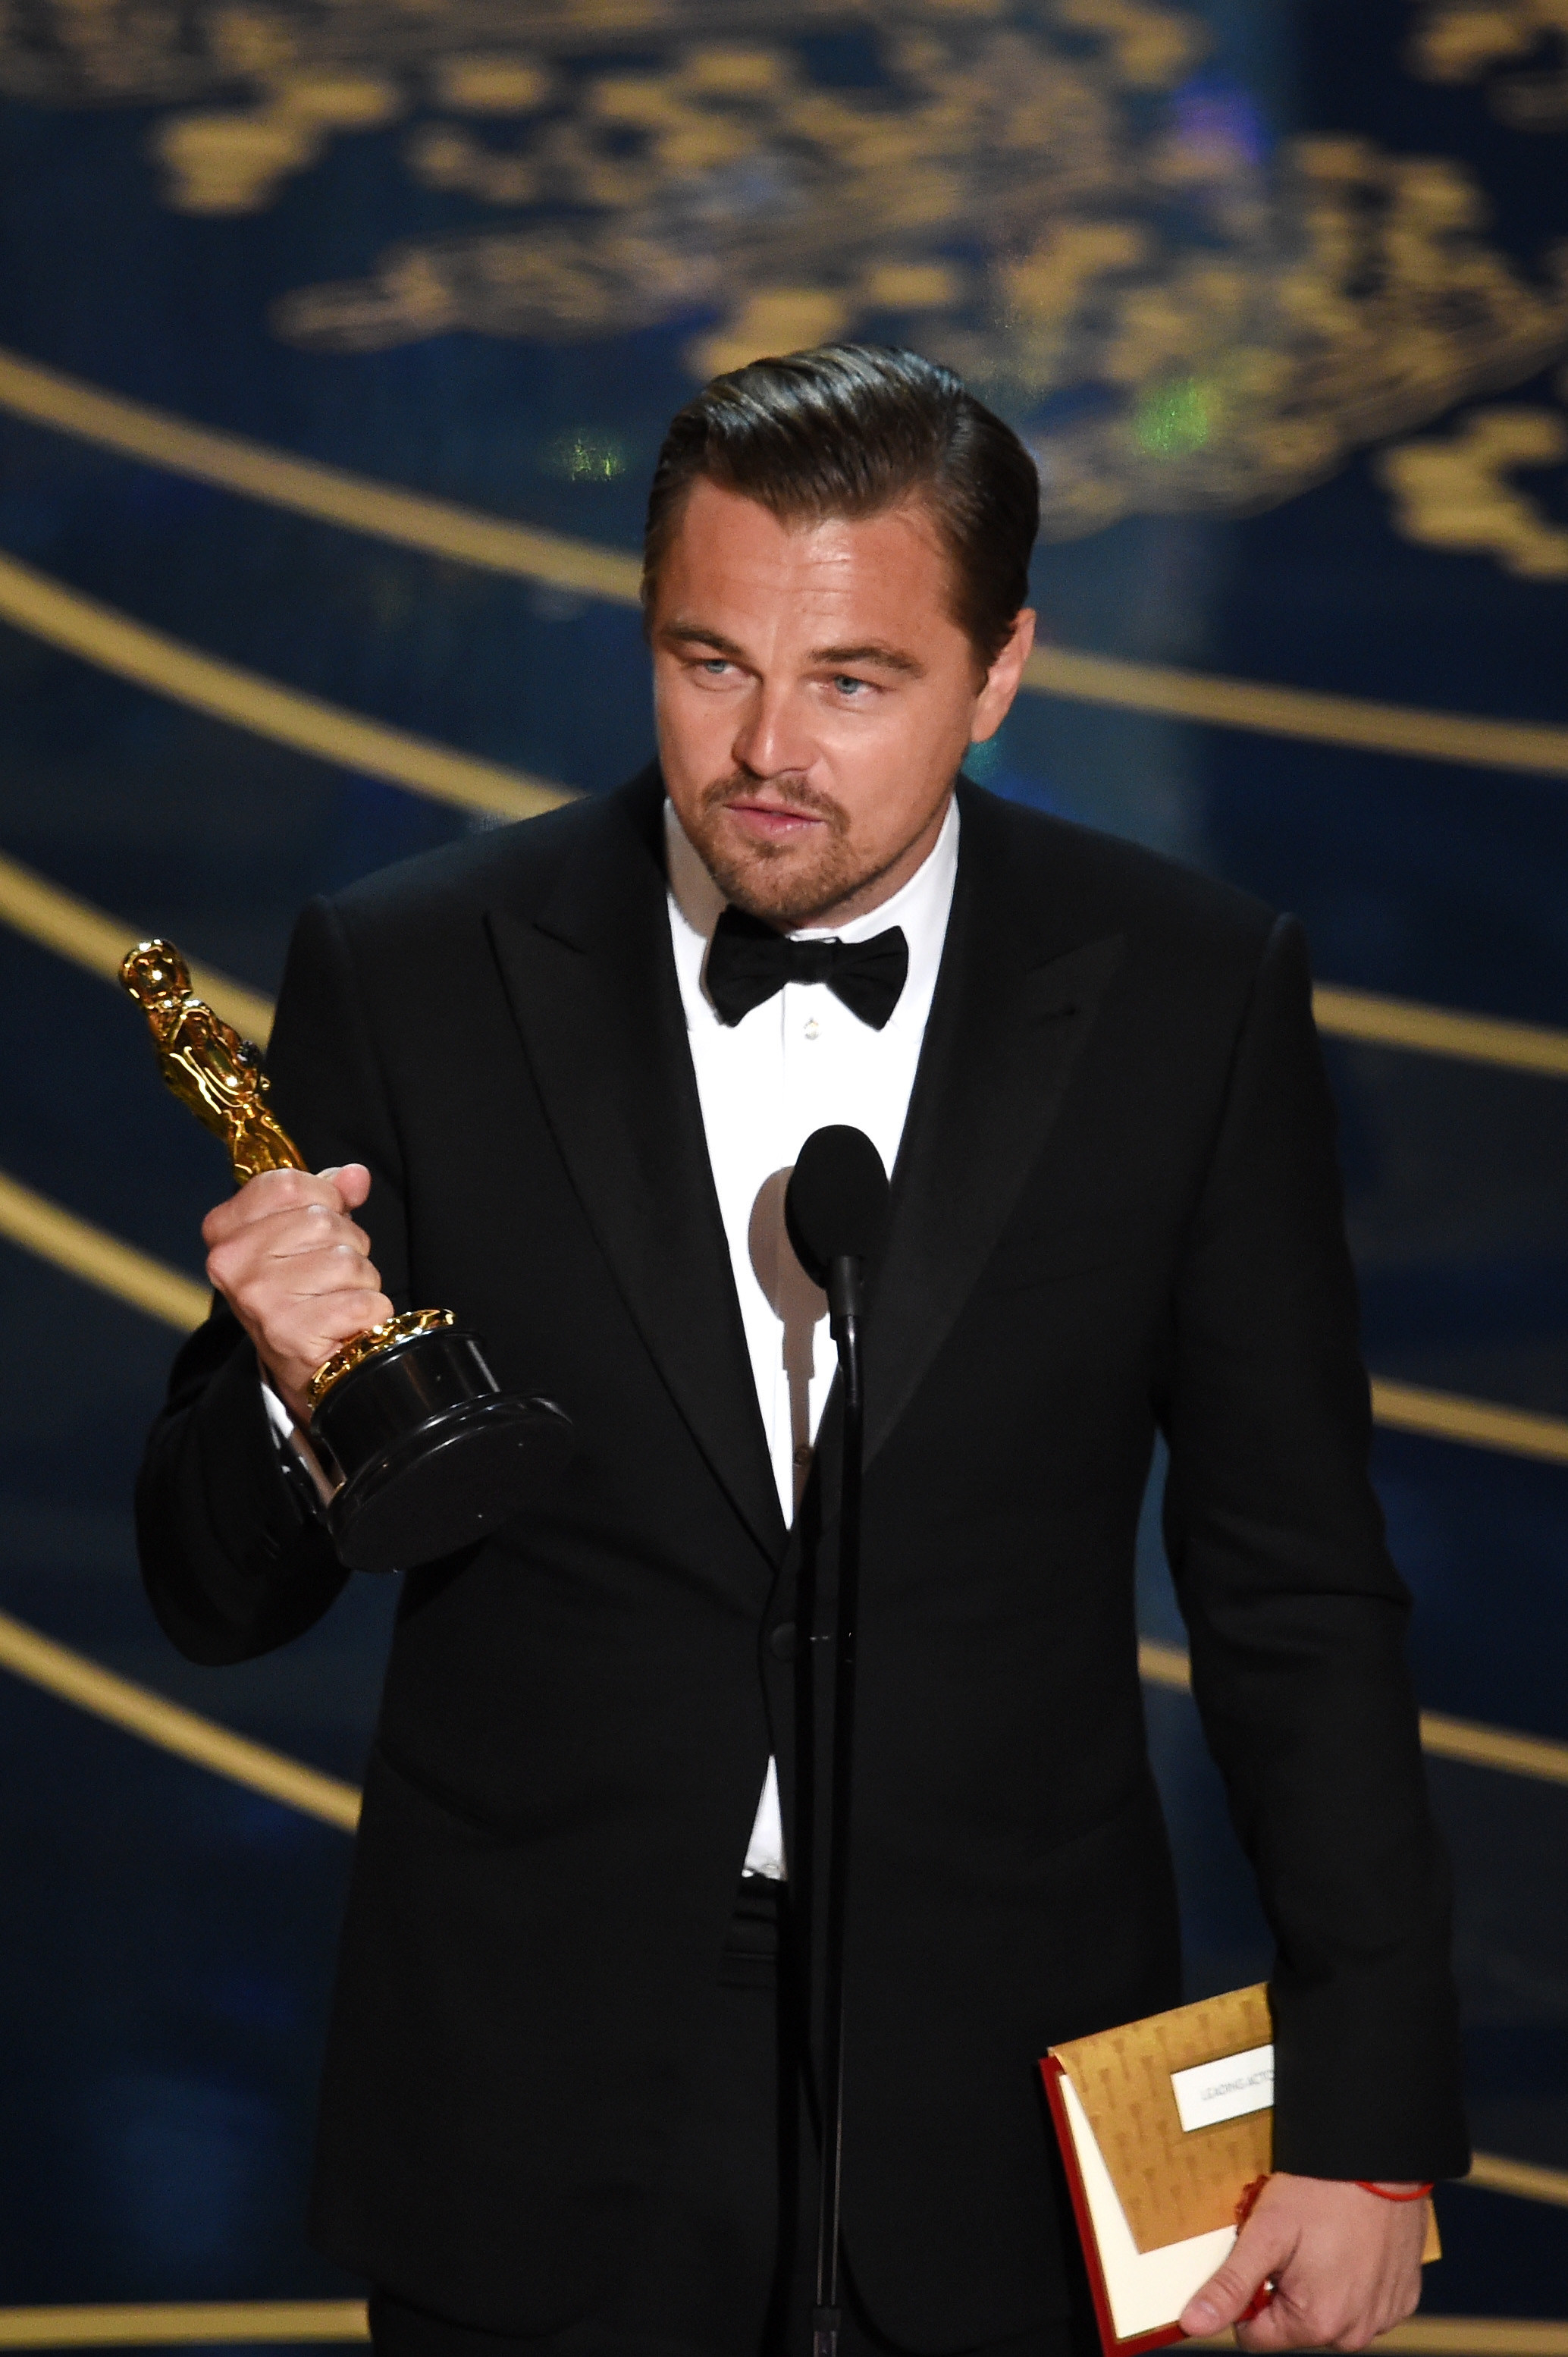 Actor Leonardo DiCaprio accepts the Best Actor award for &#x27;The Revenant&#x27; onstage during the 88th Annual Academy Awards at the Dolby Theatre on February 28, 2016 in Hollywood, California